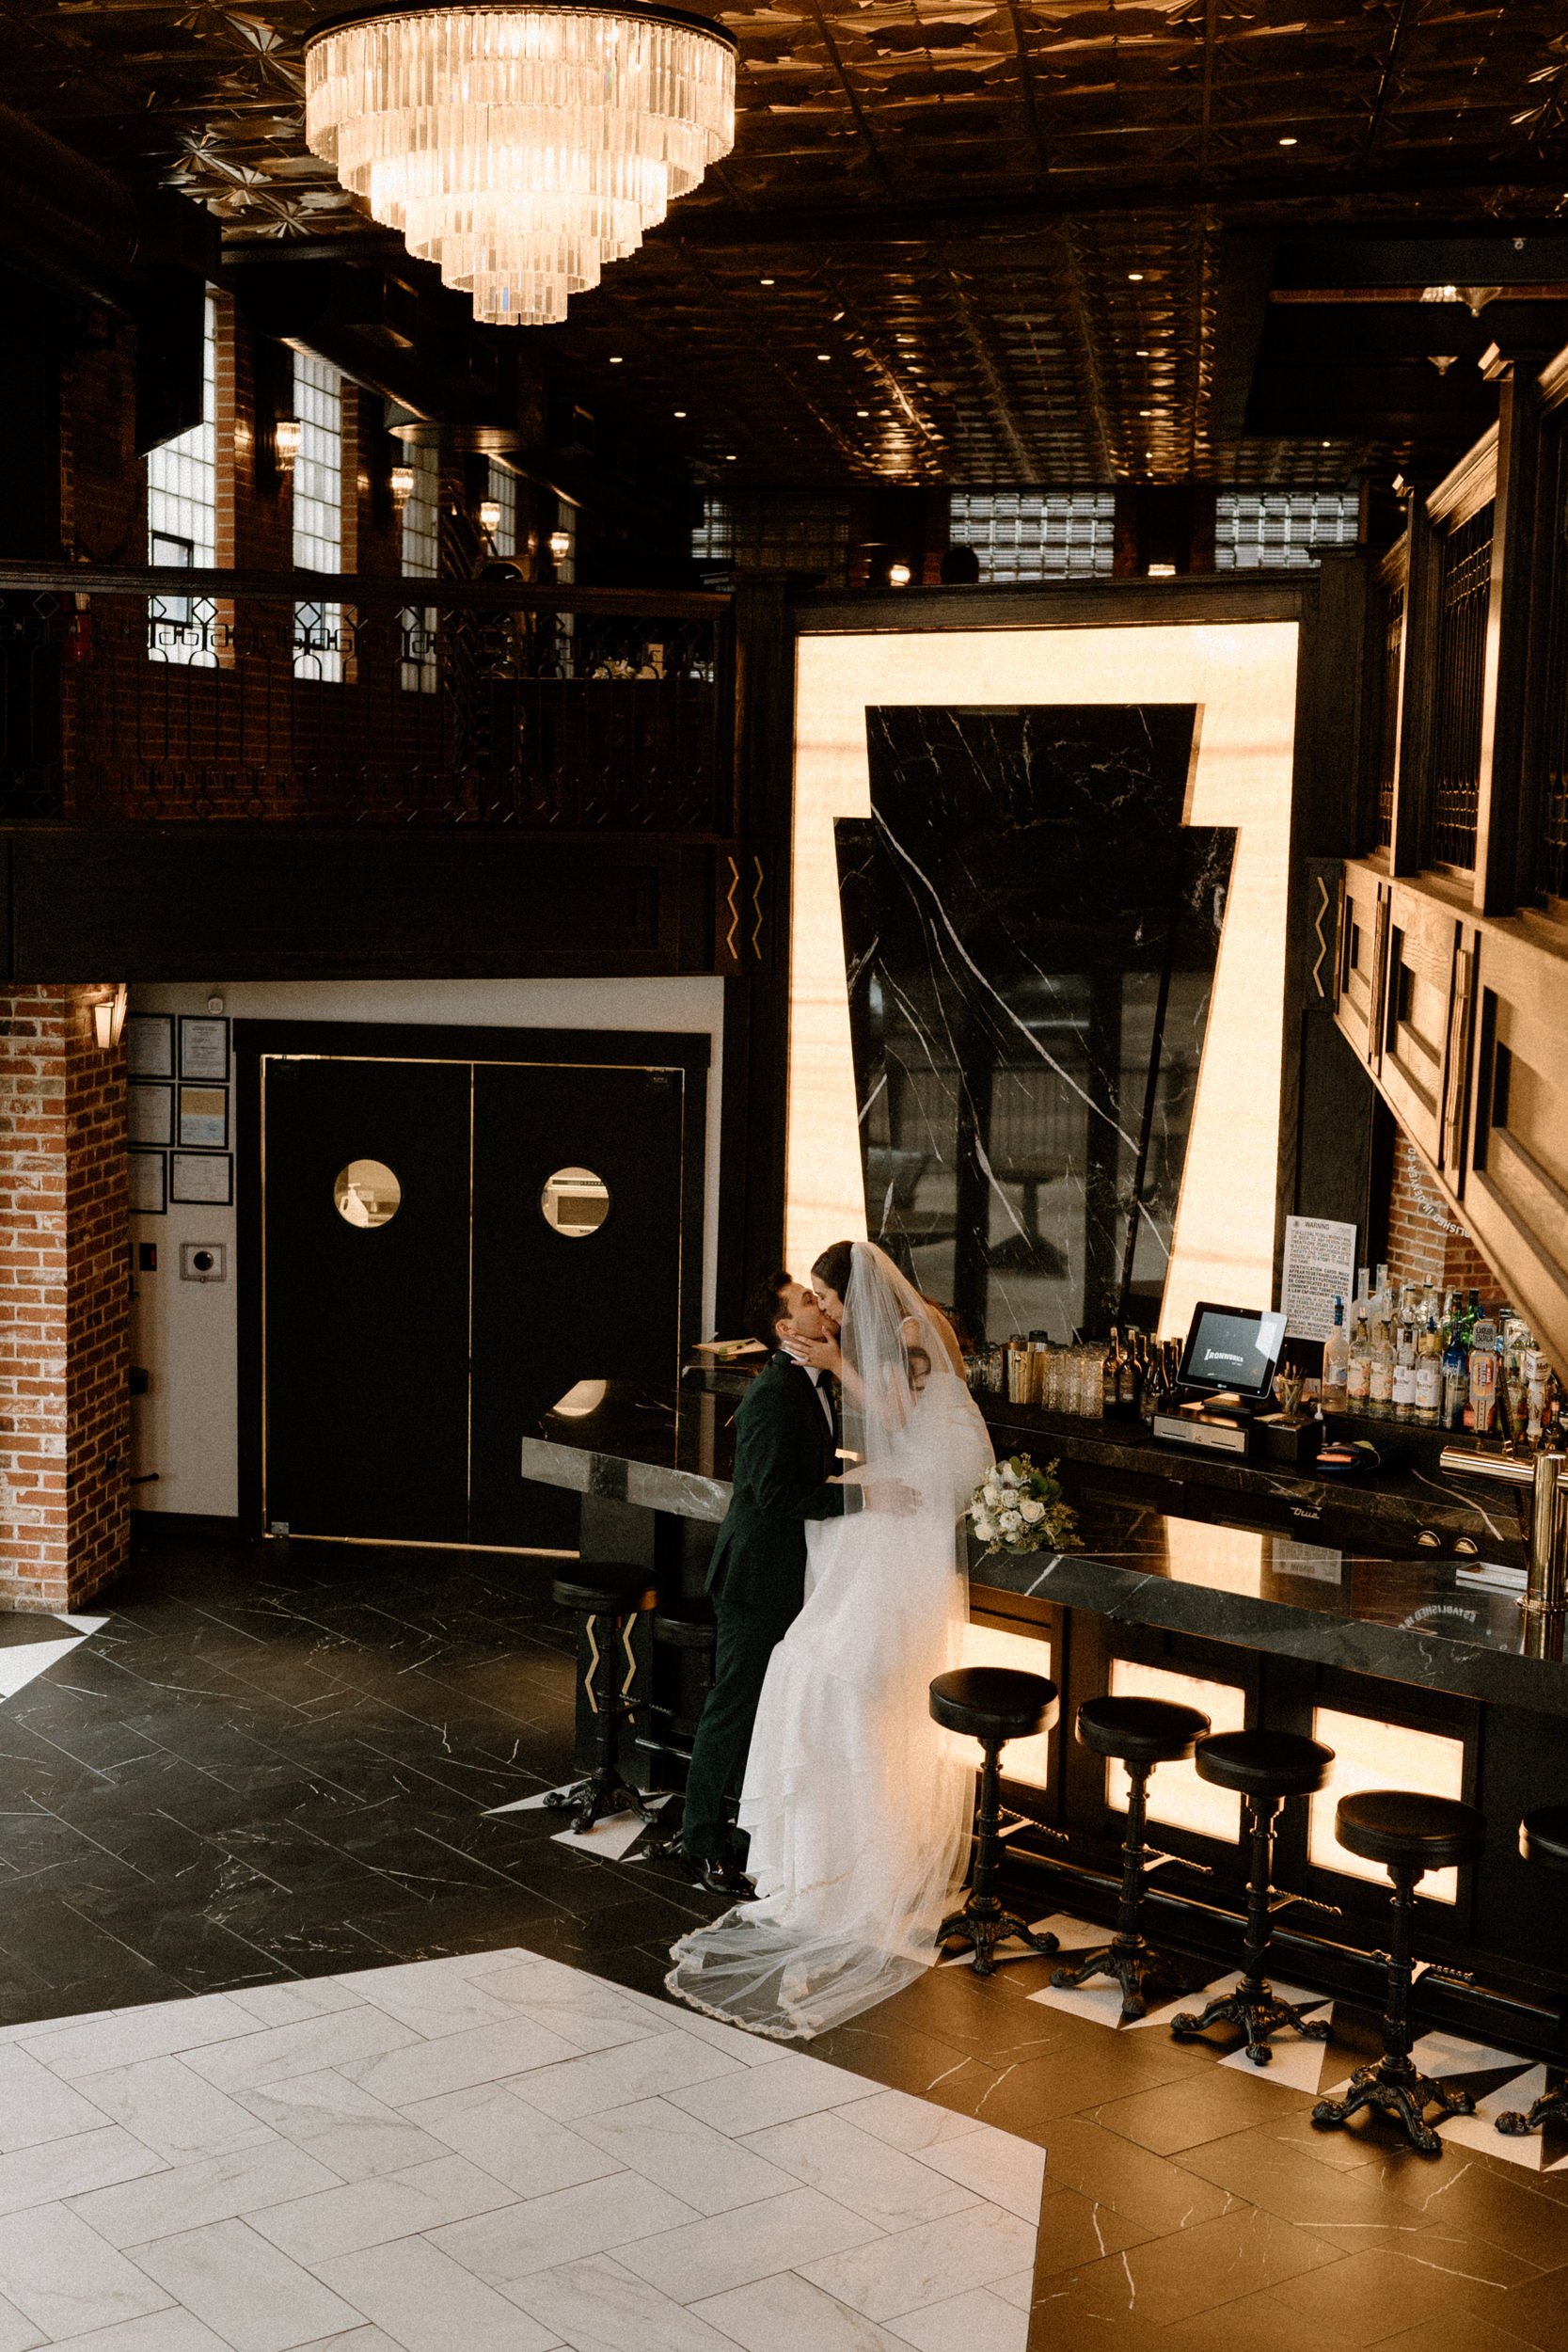 The bride and groom kiss at the bar at Ironworks in Denver, CO